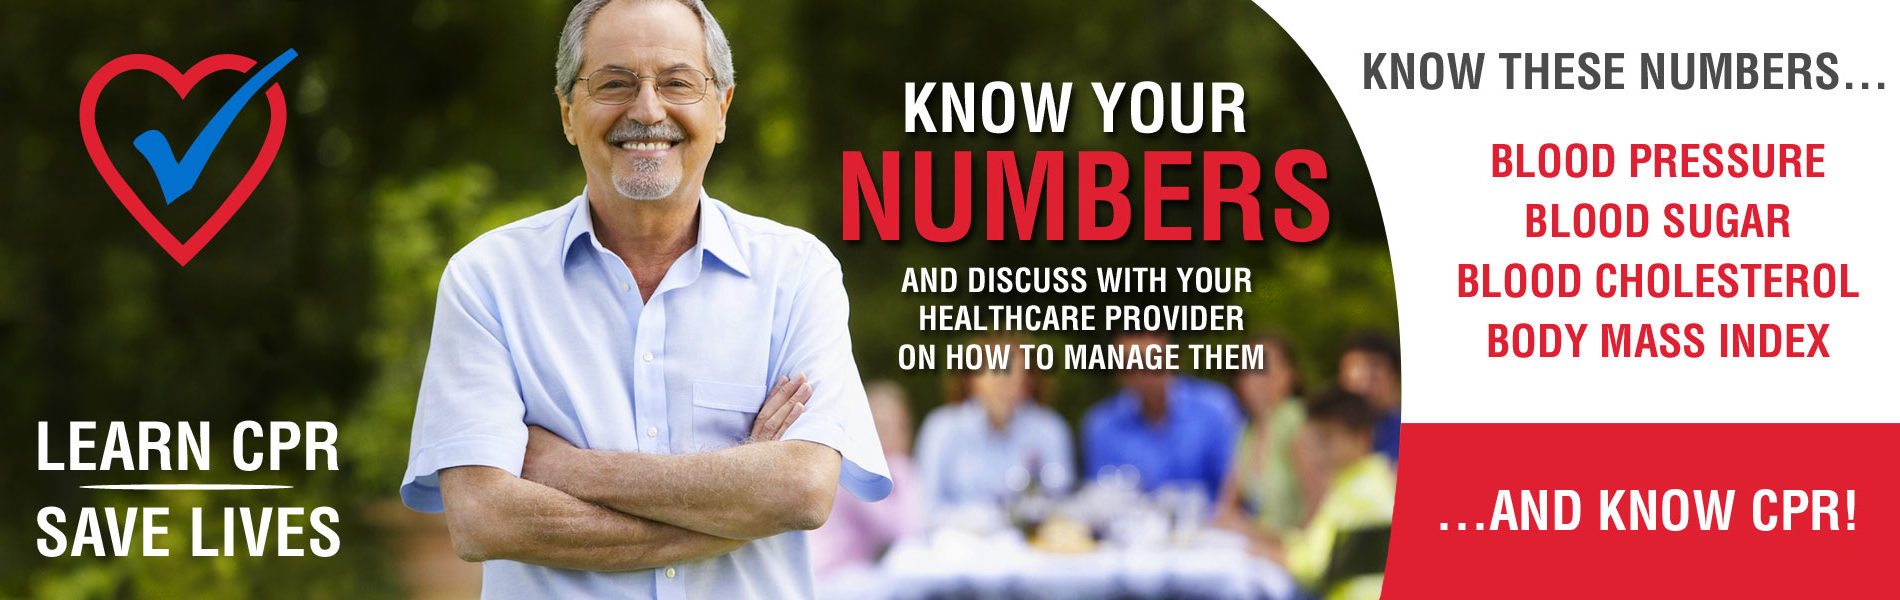 know-your-numbers